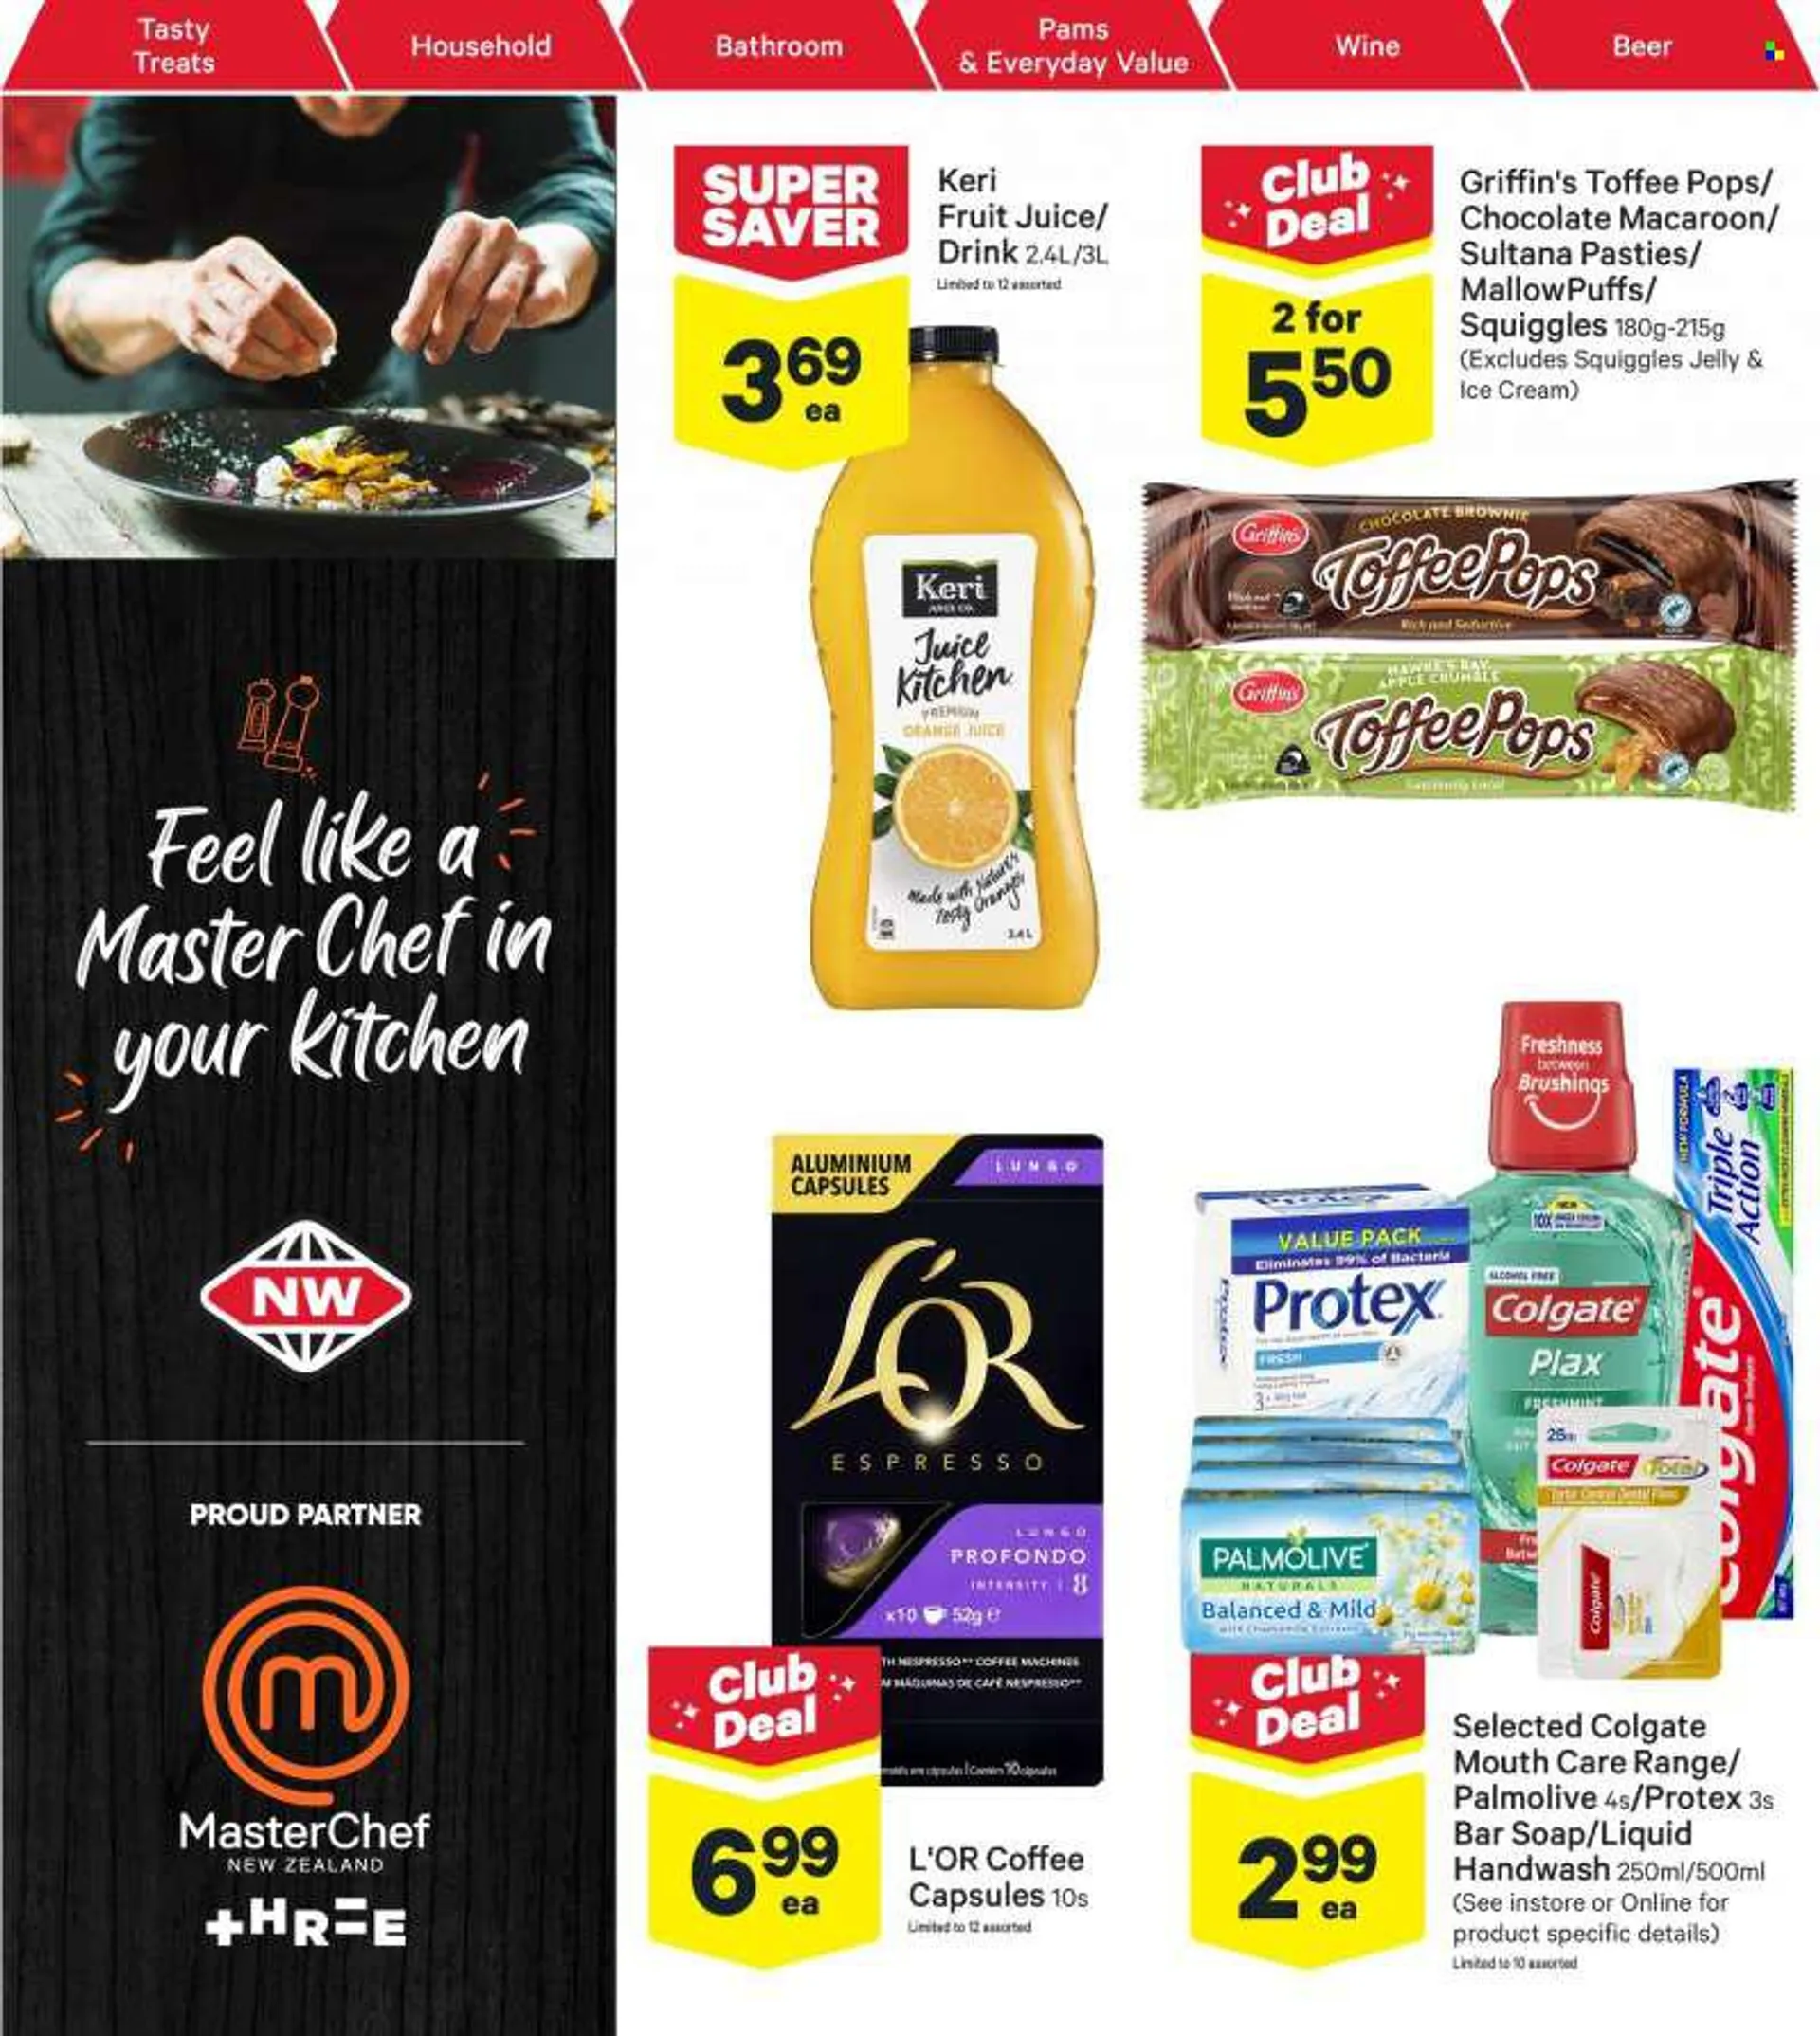 New World mailer - 13.06.2022 - 19.06.2022 - Sales products - Puffs, brownies, ice cream, toffee, jelly, biscuit, Griffins, orange juice, juice, fruit juice, coffee, Nespresso, coffee capsules, LOr, wine, beer, antimicrobial soap, hand wash, Palmolive, Pr